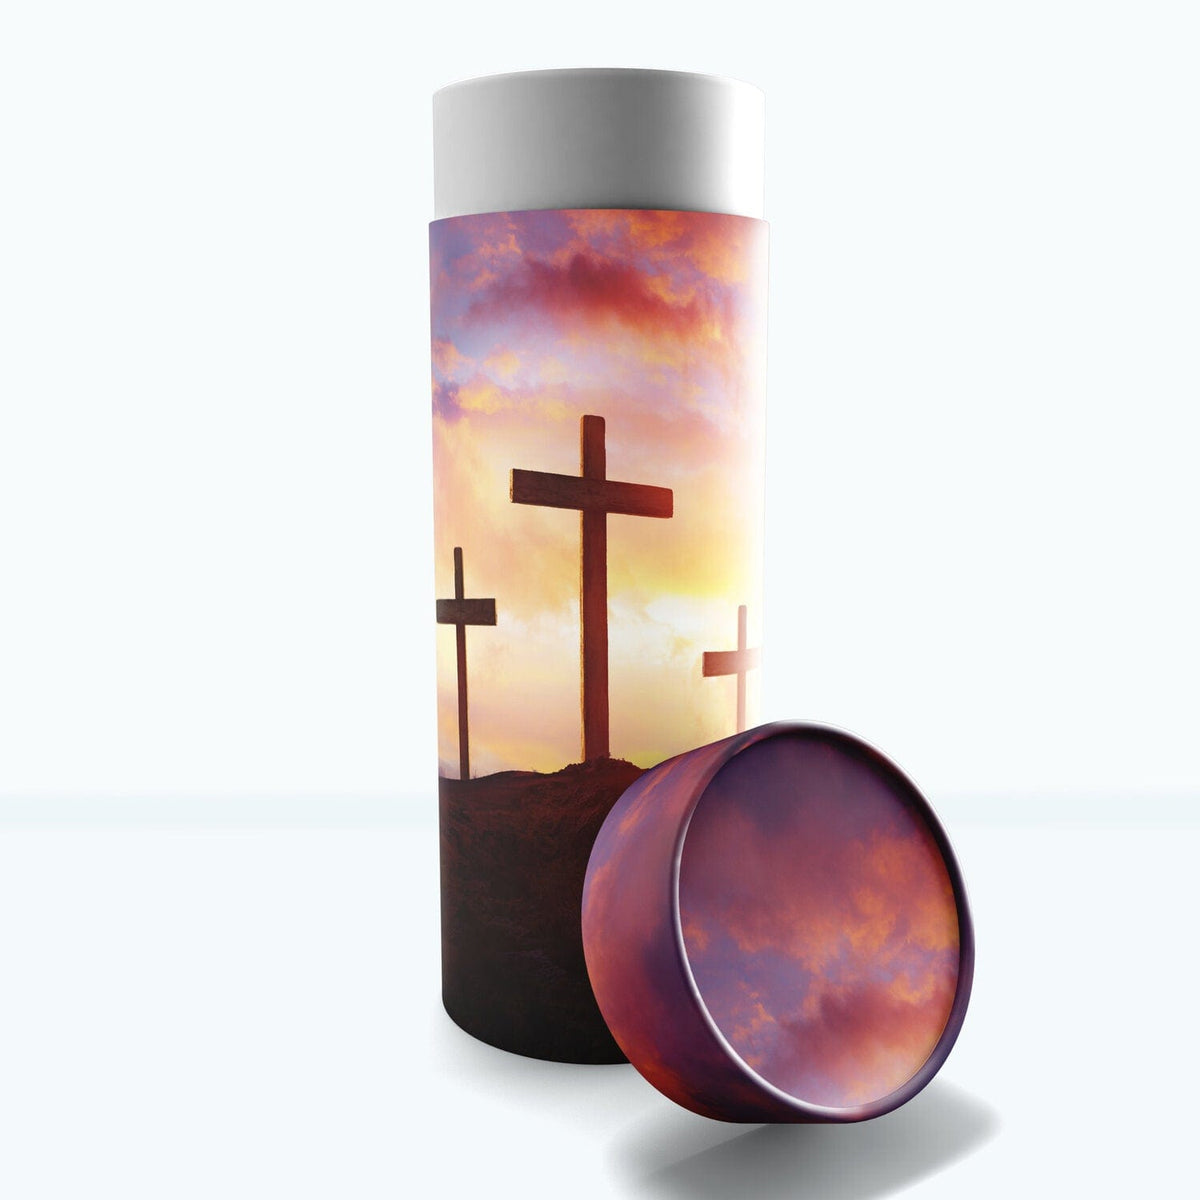 Commemorative Cremation Urns Small Three Crosses - Biodegradable &amp; Eco Friendly Burial or Scattering Urn / Tube